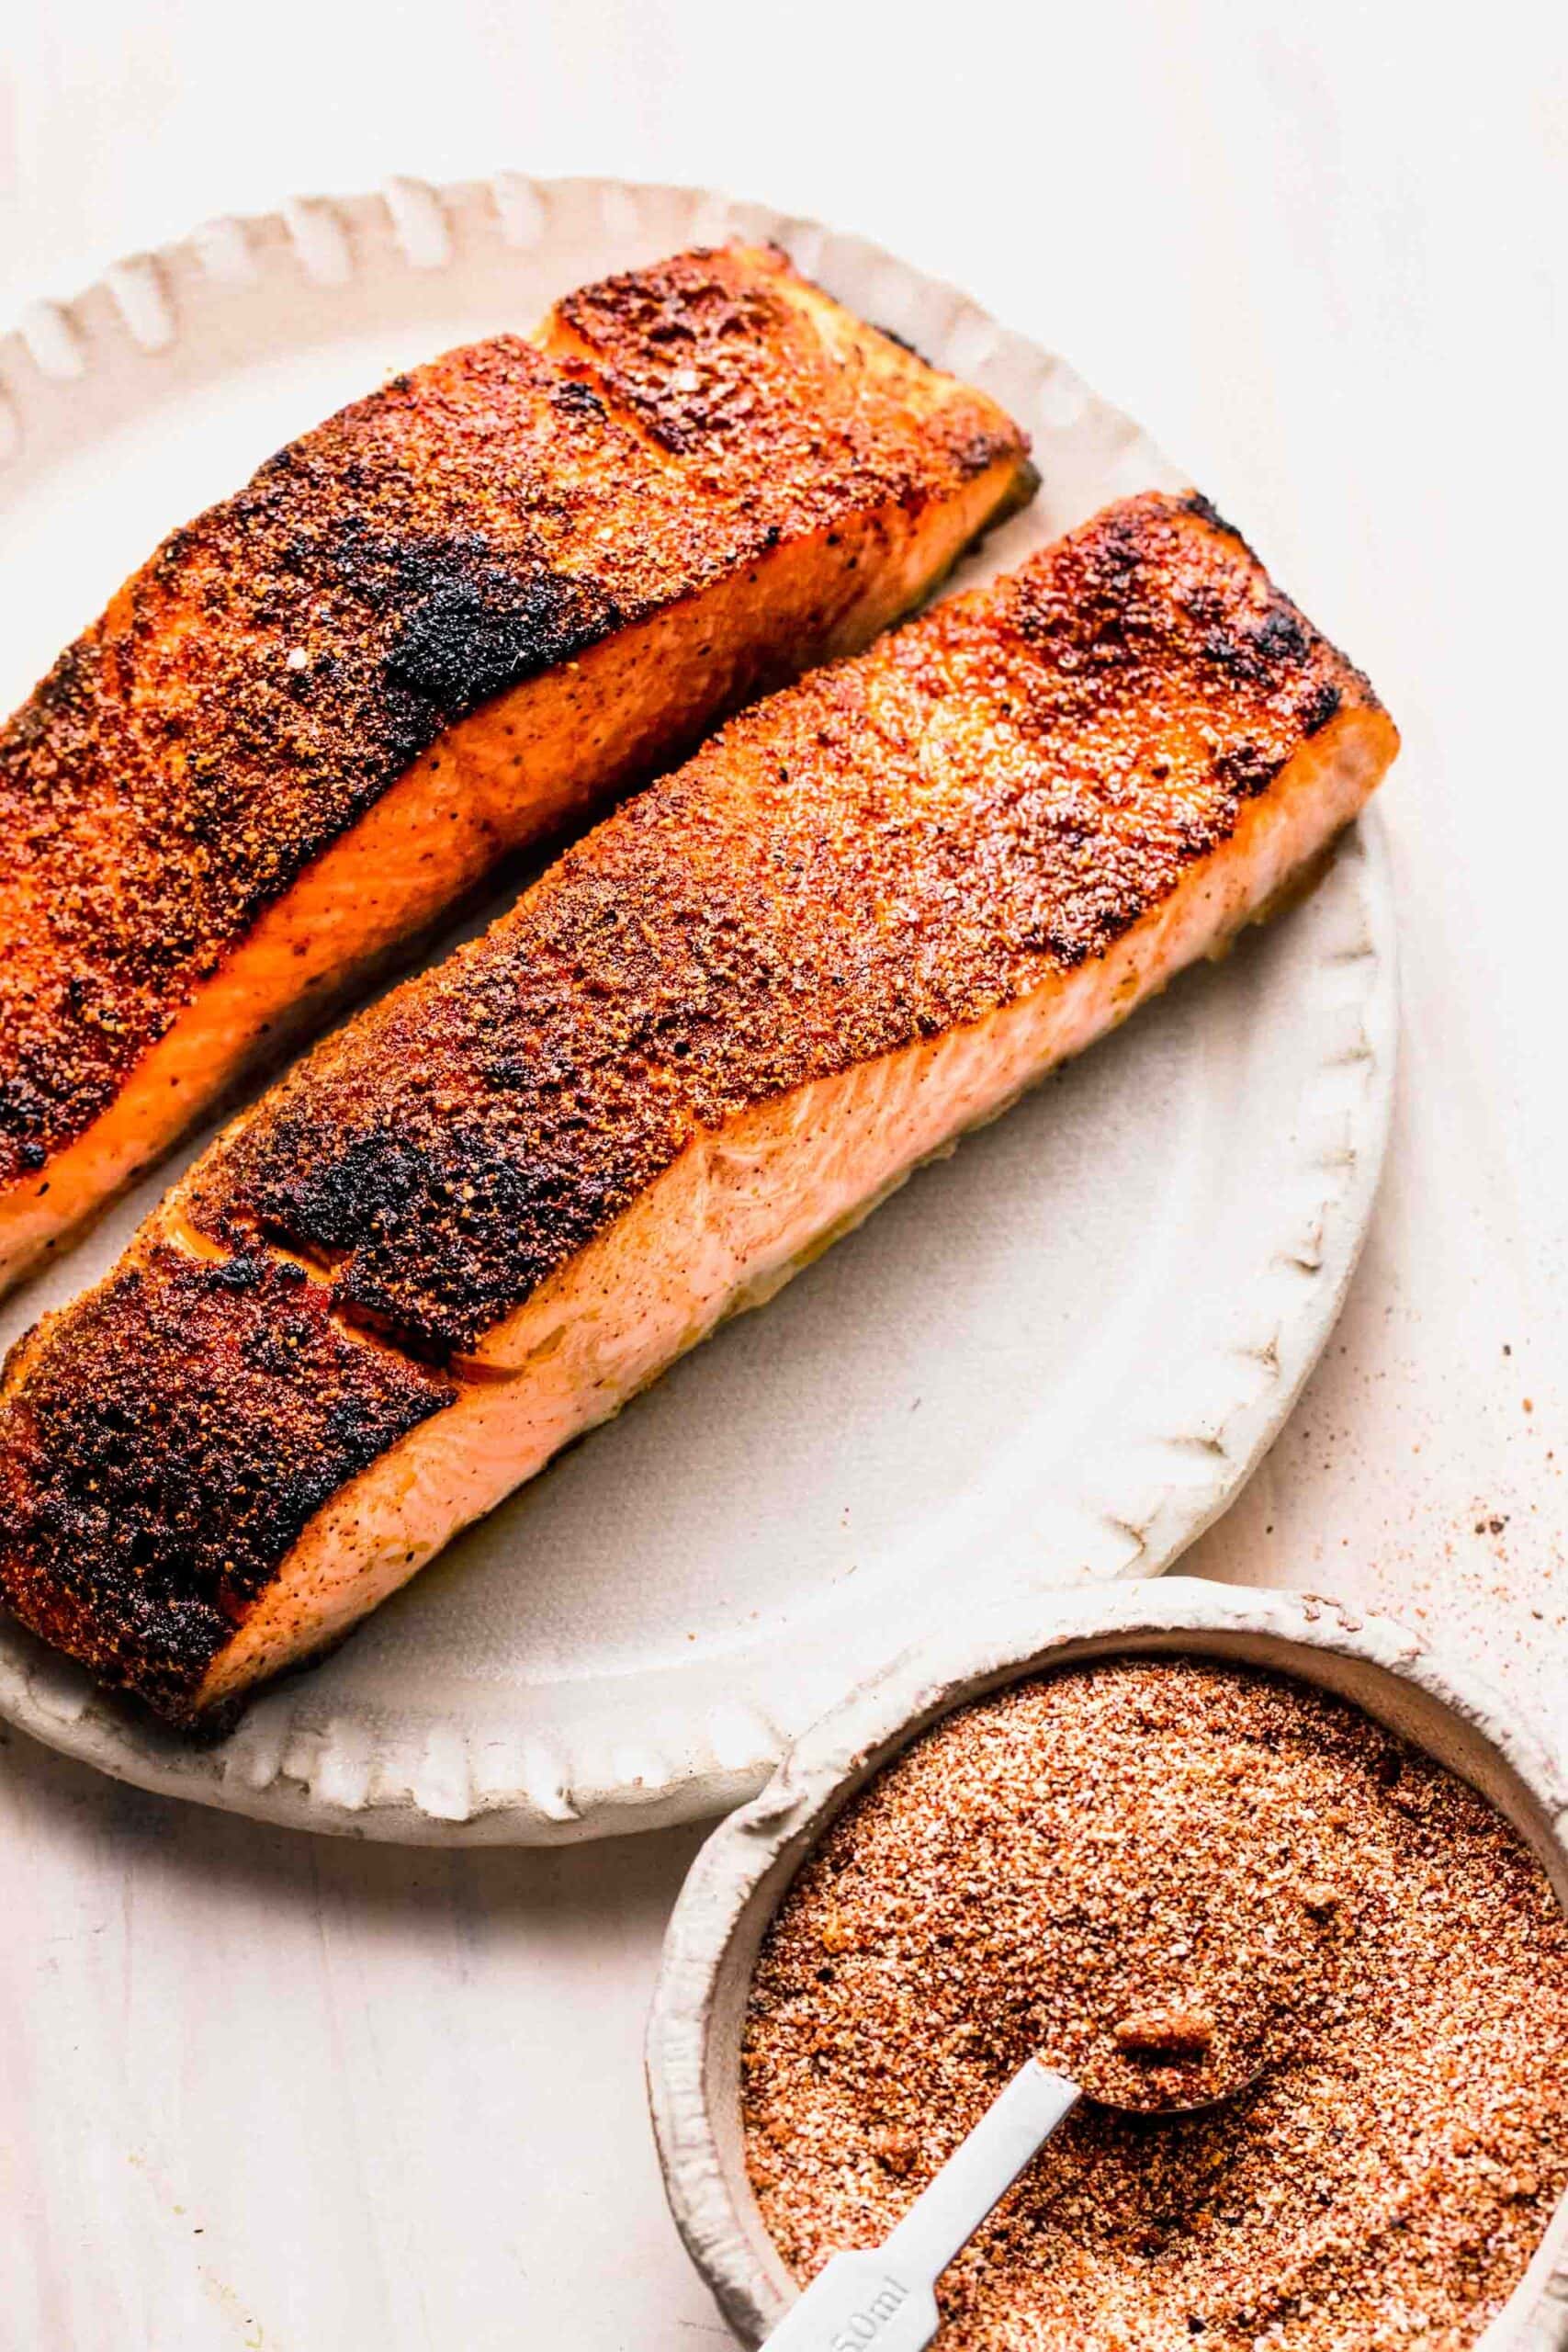 Two cooked filets of salmon next to small bowl of salmon dry rub.